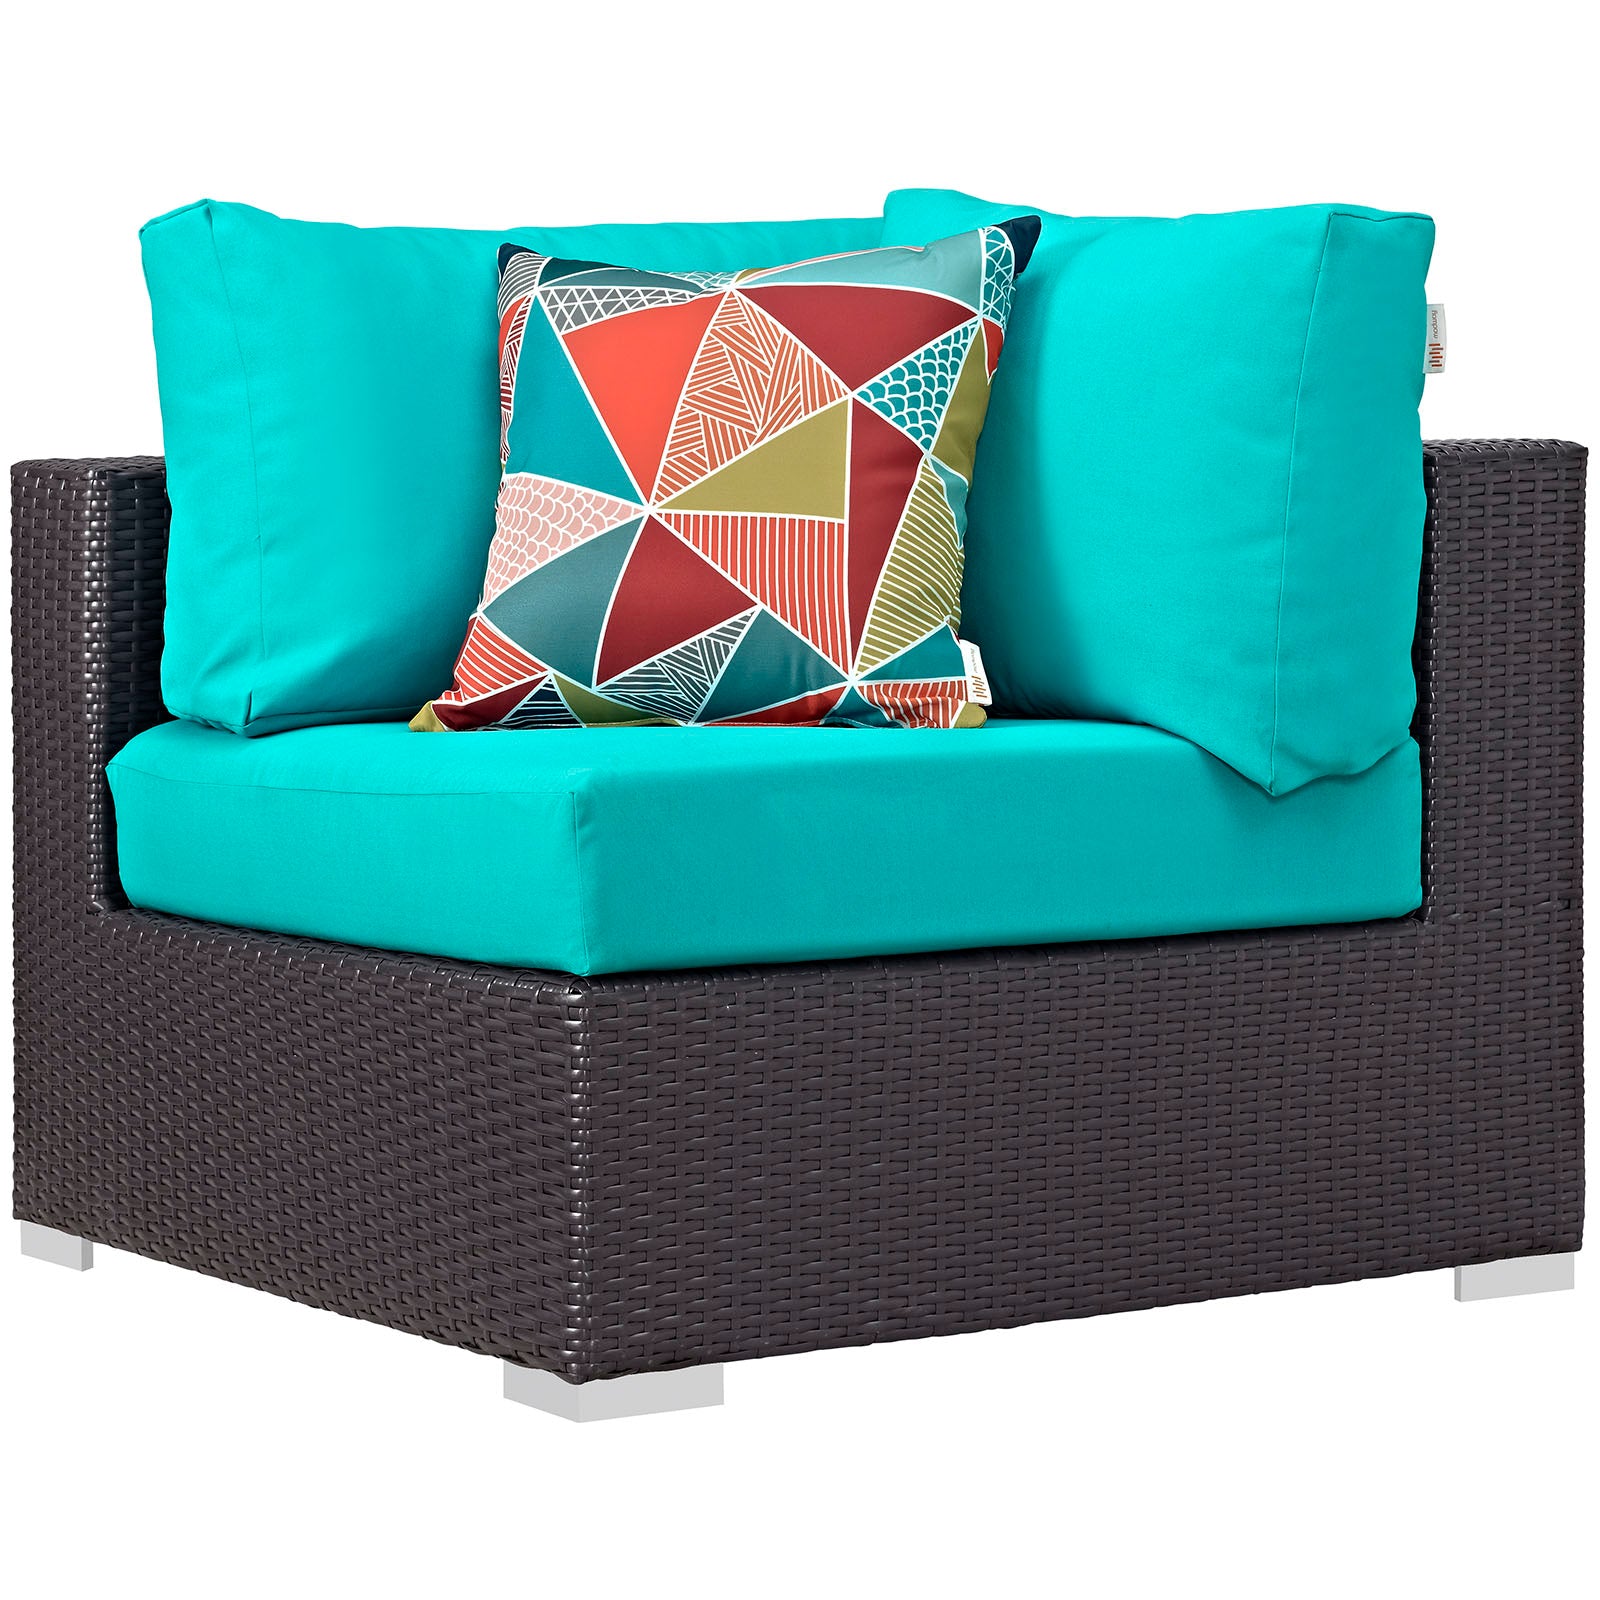 Modway Outdoor Conversation Sets - Convene 5 Piece Outdoor Patio Sectional Set Turquoise